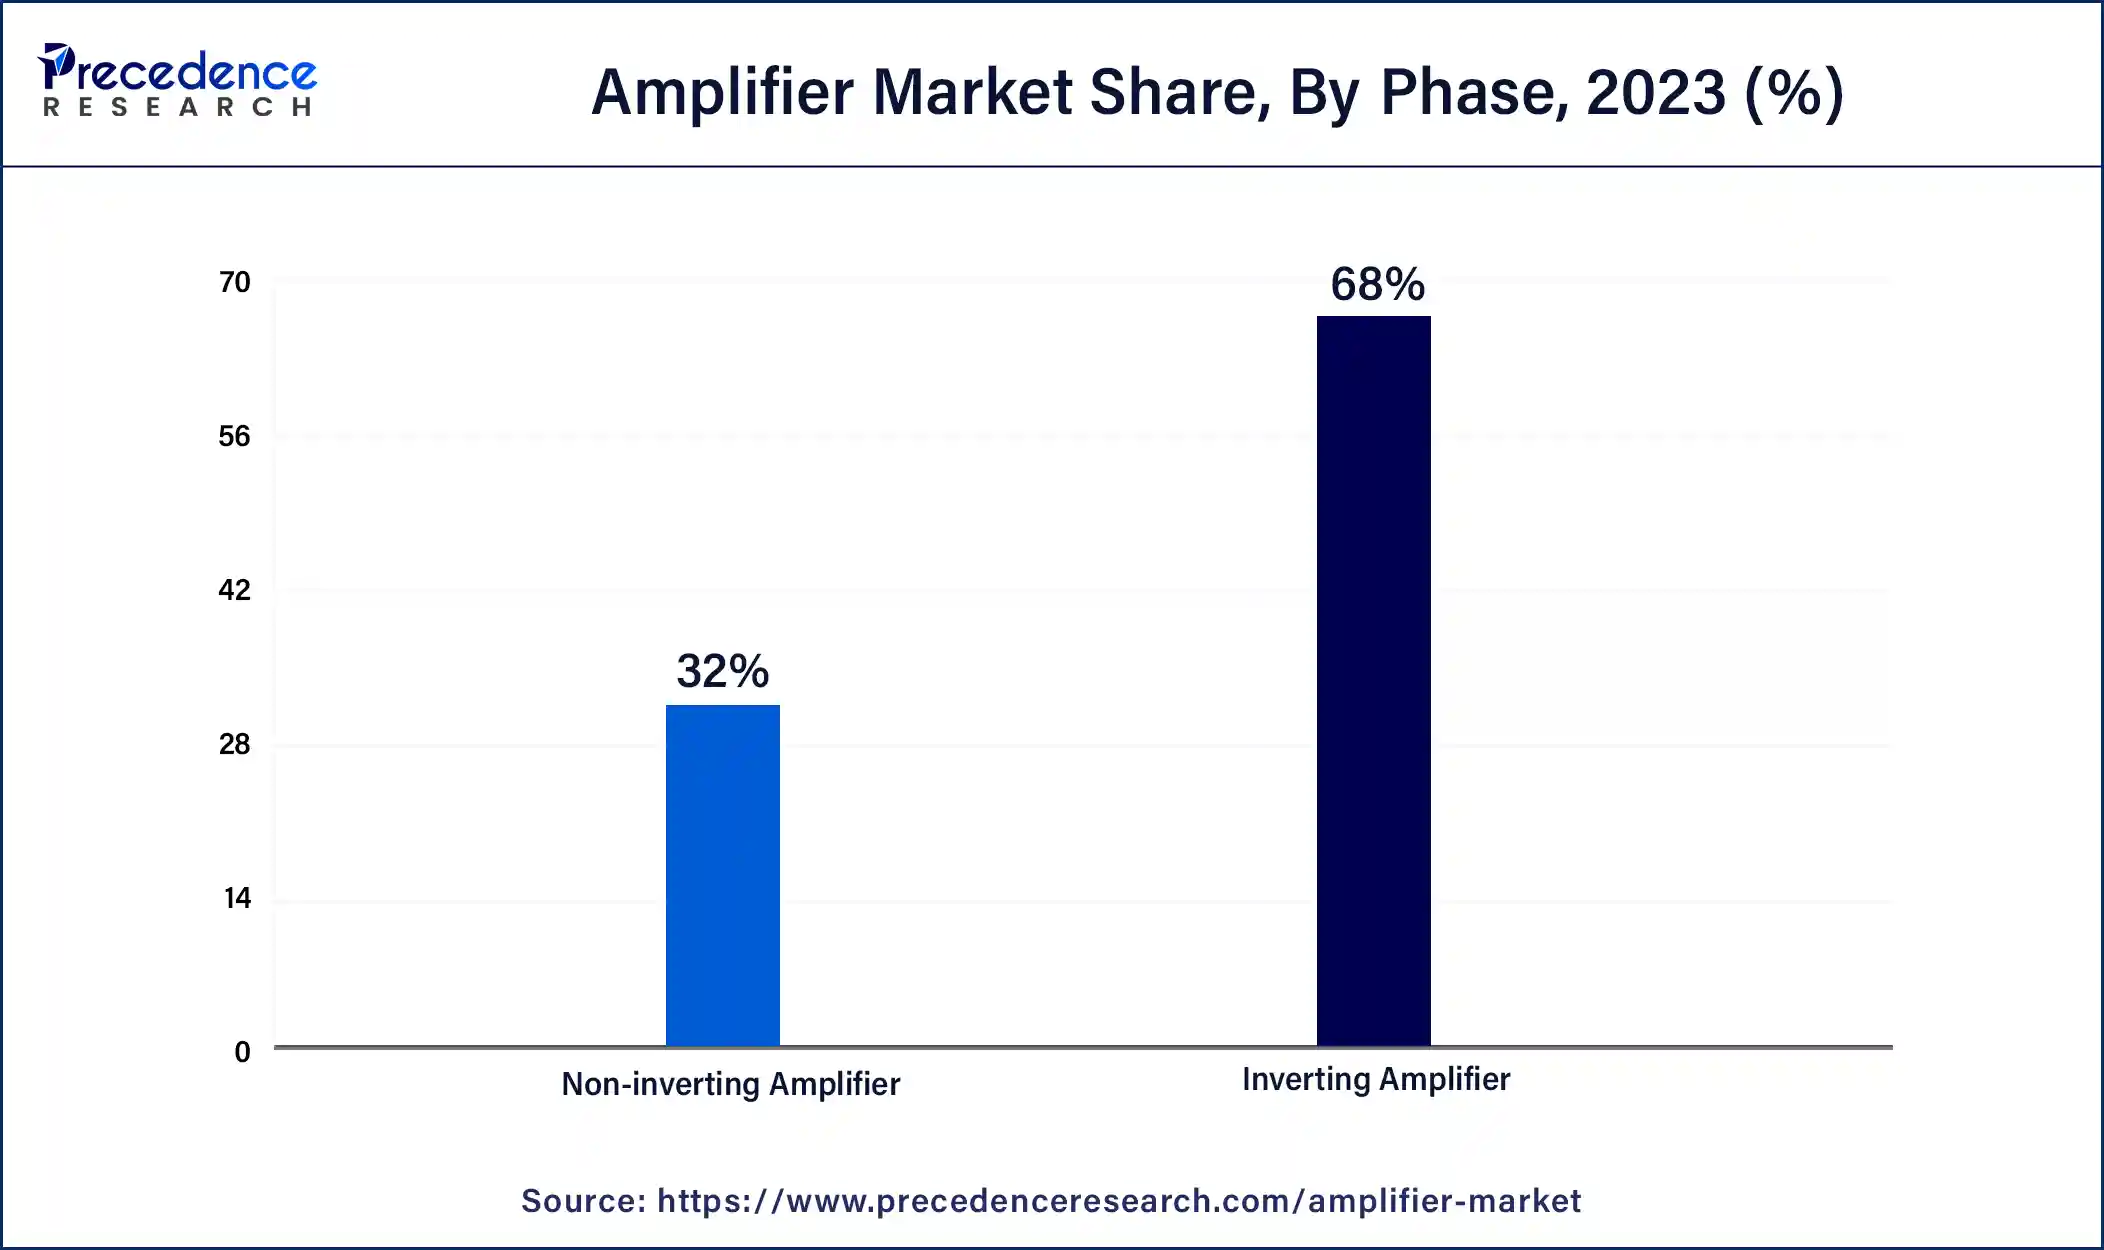 Amplifier Market Share, By Phase, 2023 (%)